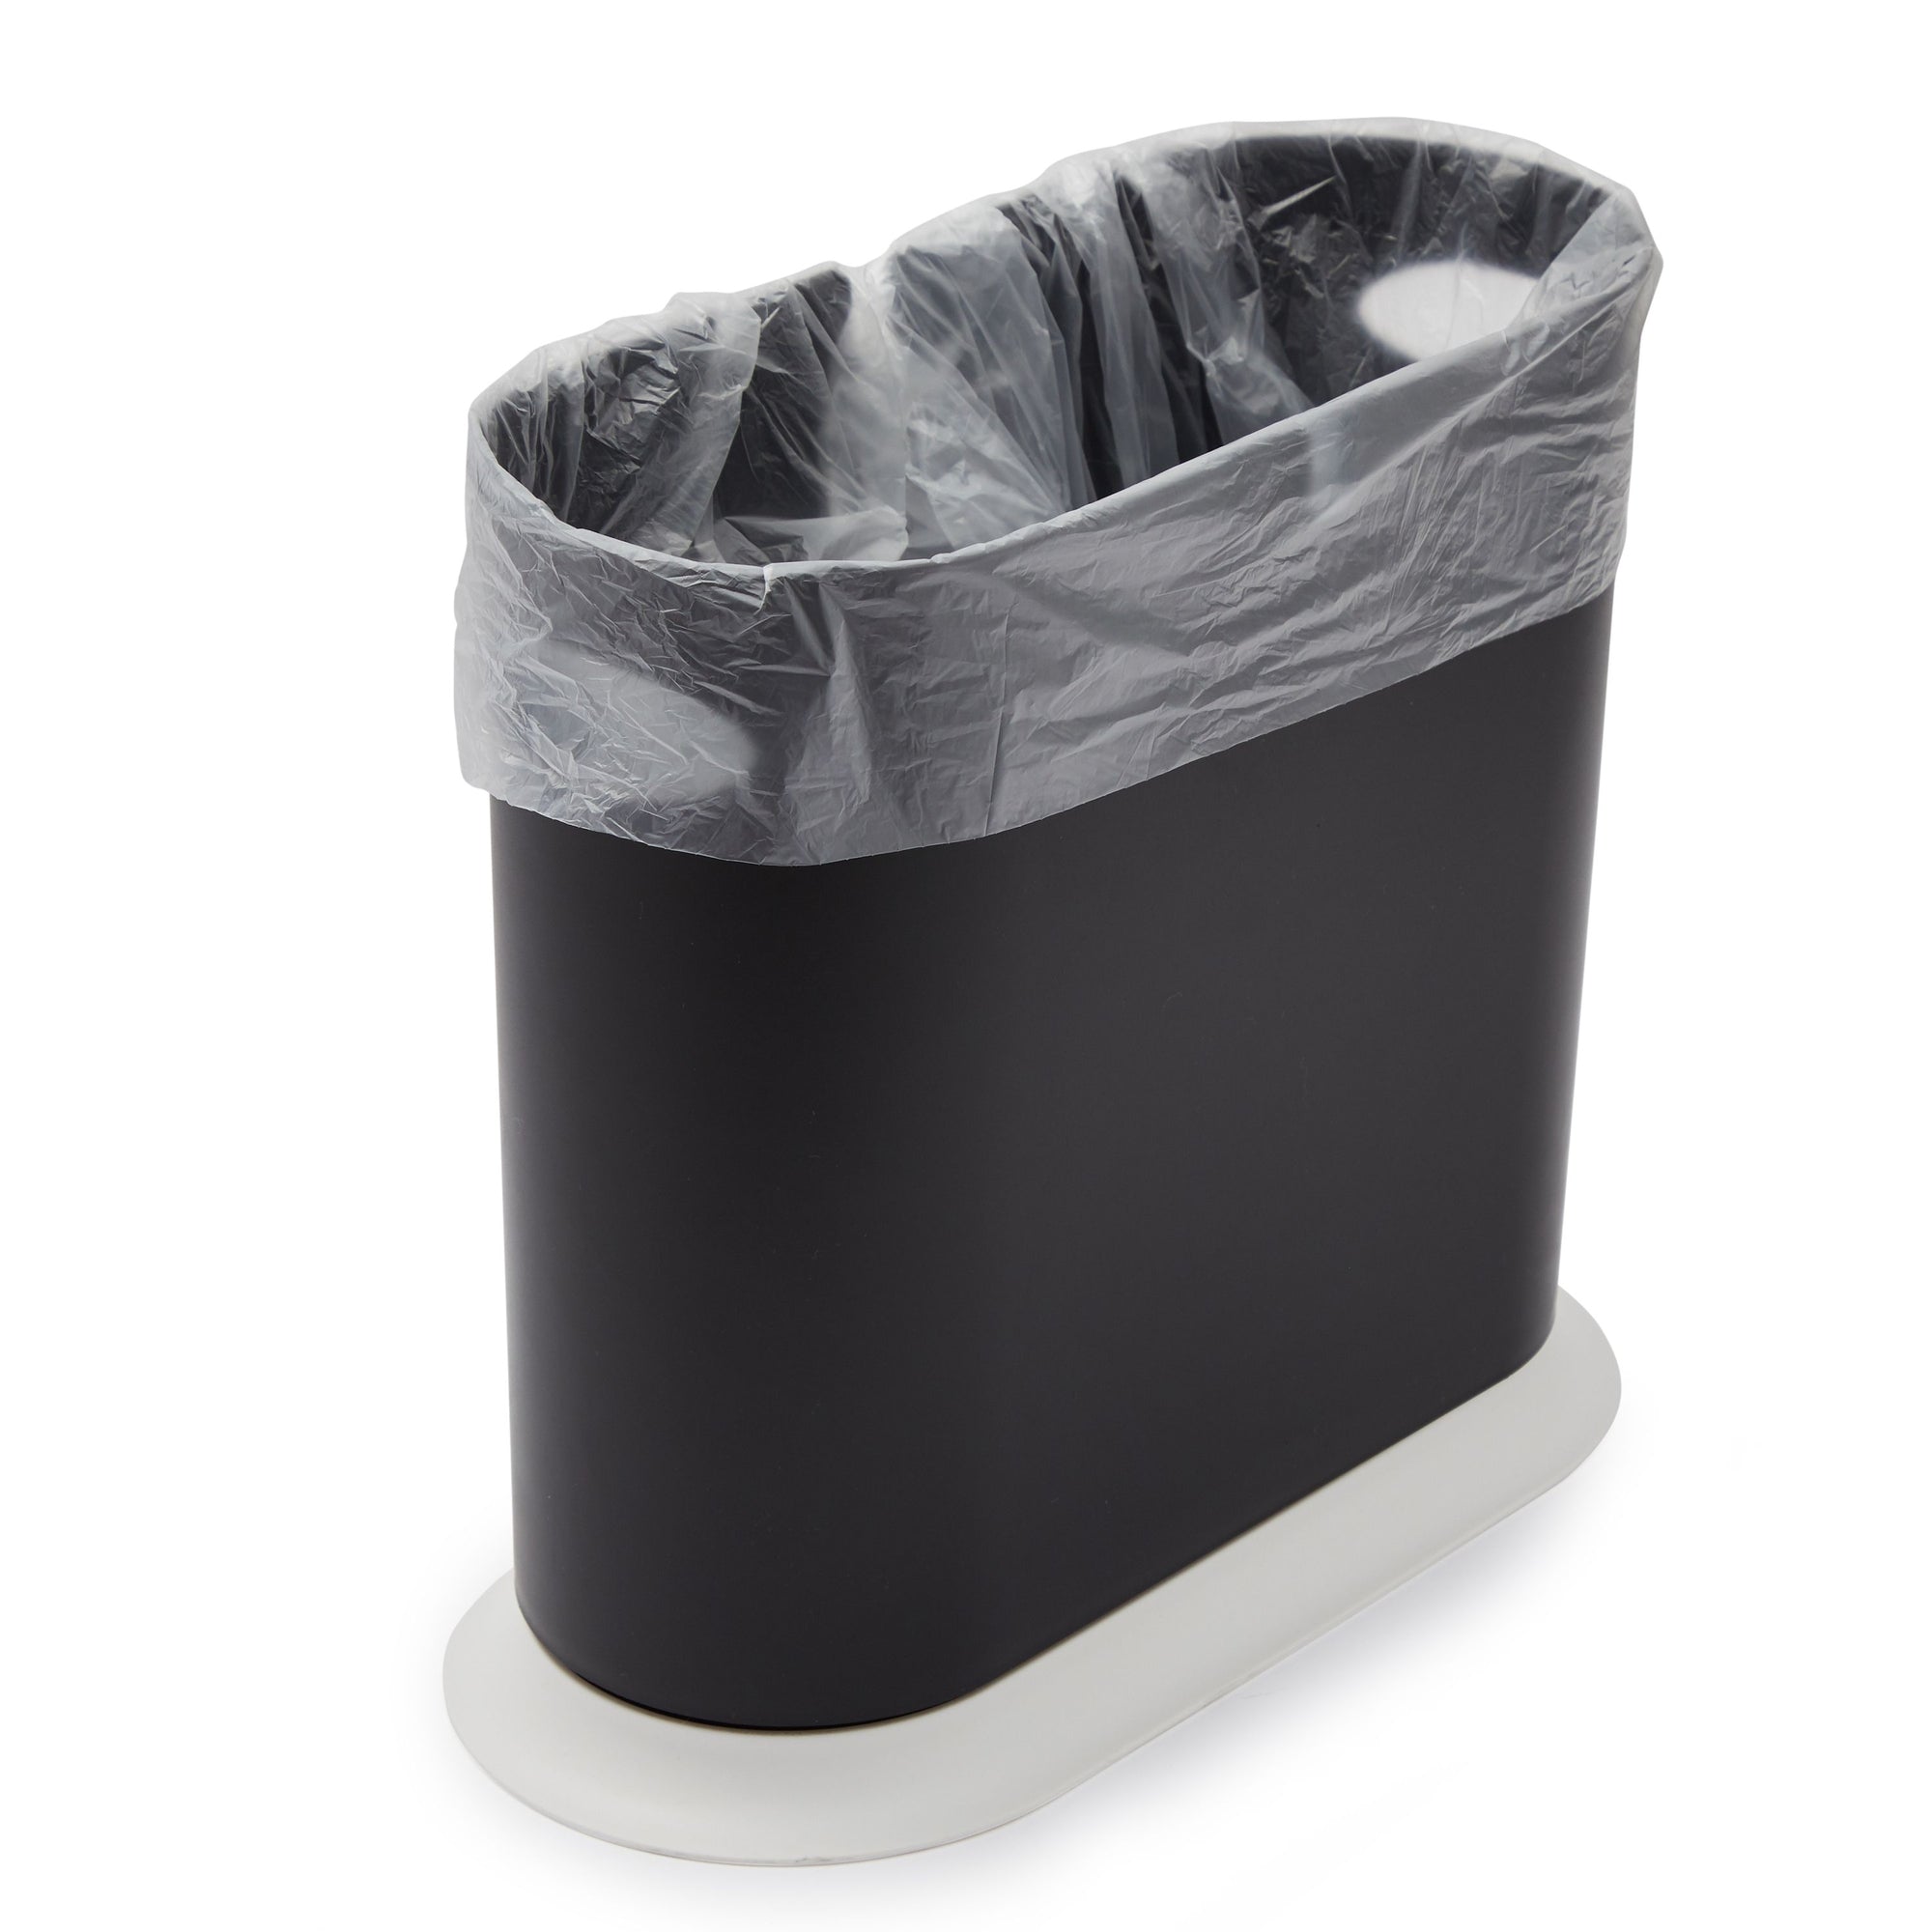 Buy on the official website Juvale Designed for Modern Living, 10l trash  can bags